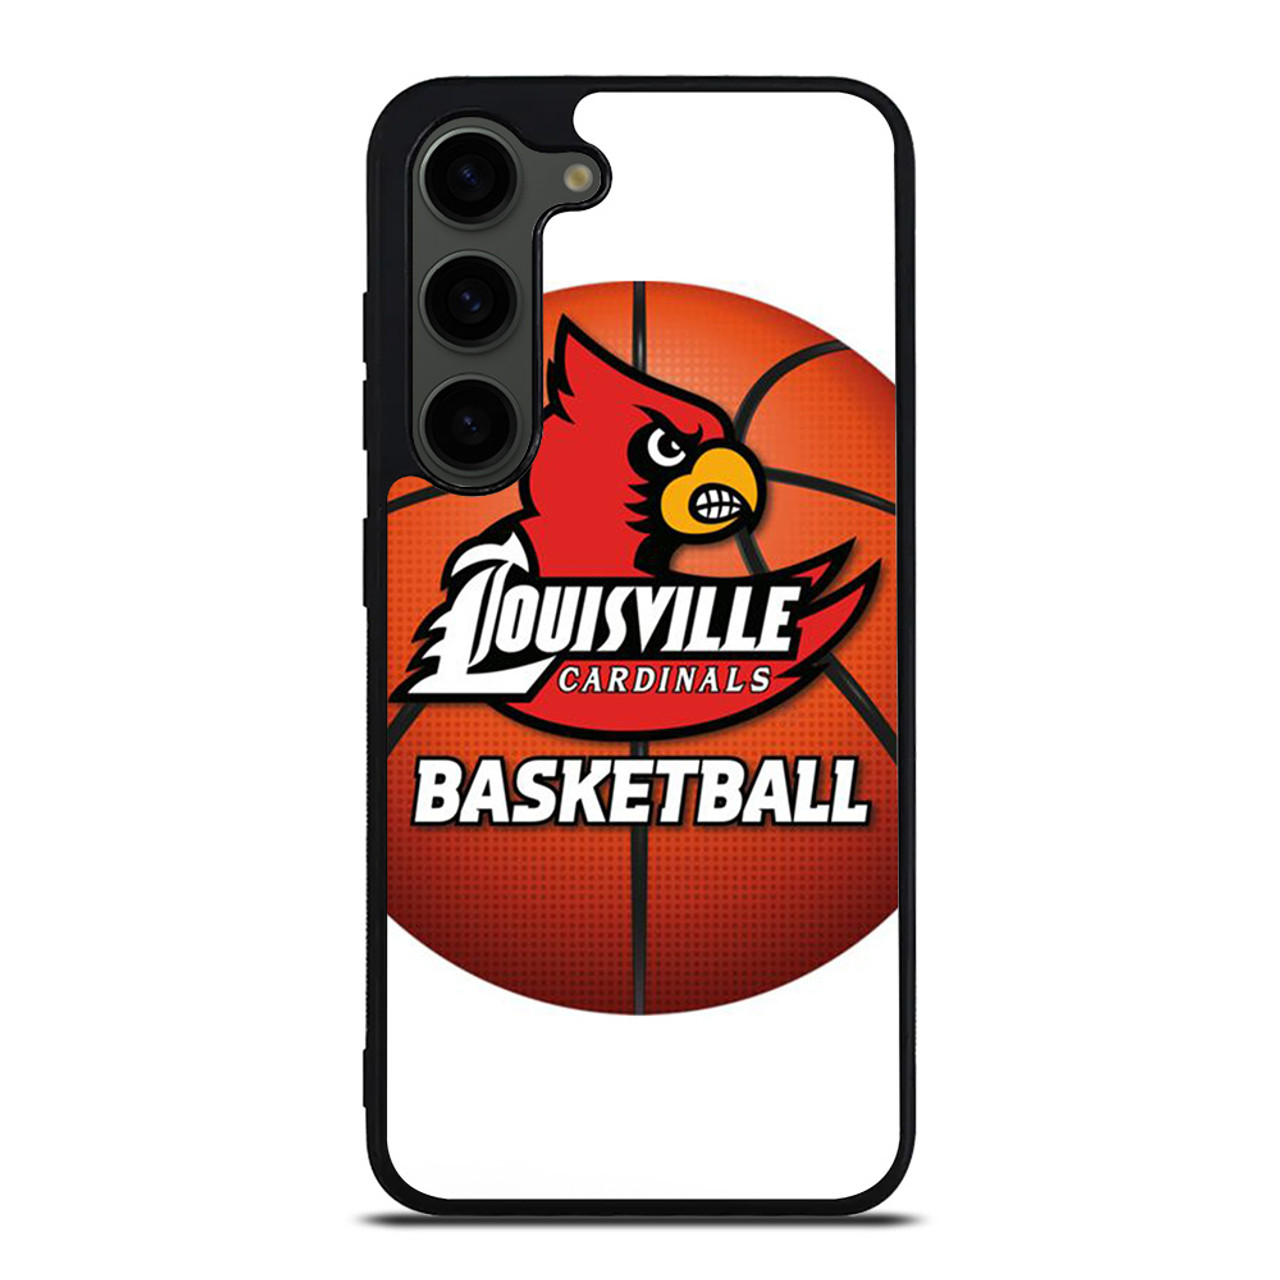 UNIVERSITY OF LOUISVILLE CARDINALS BASKETBALL Samsung Galaxy S23 Plus Case  Cover